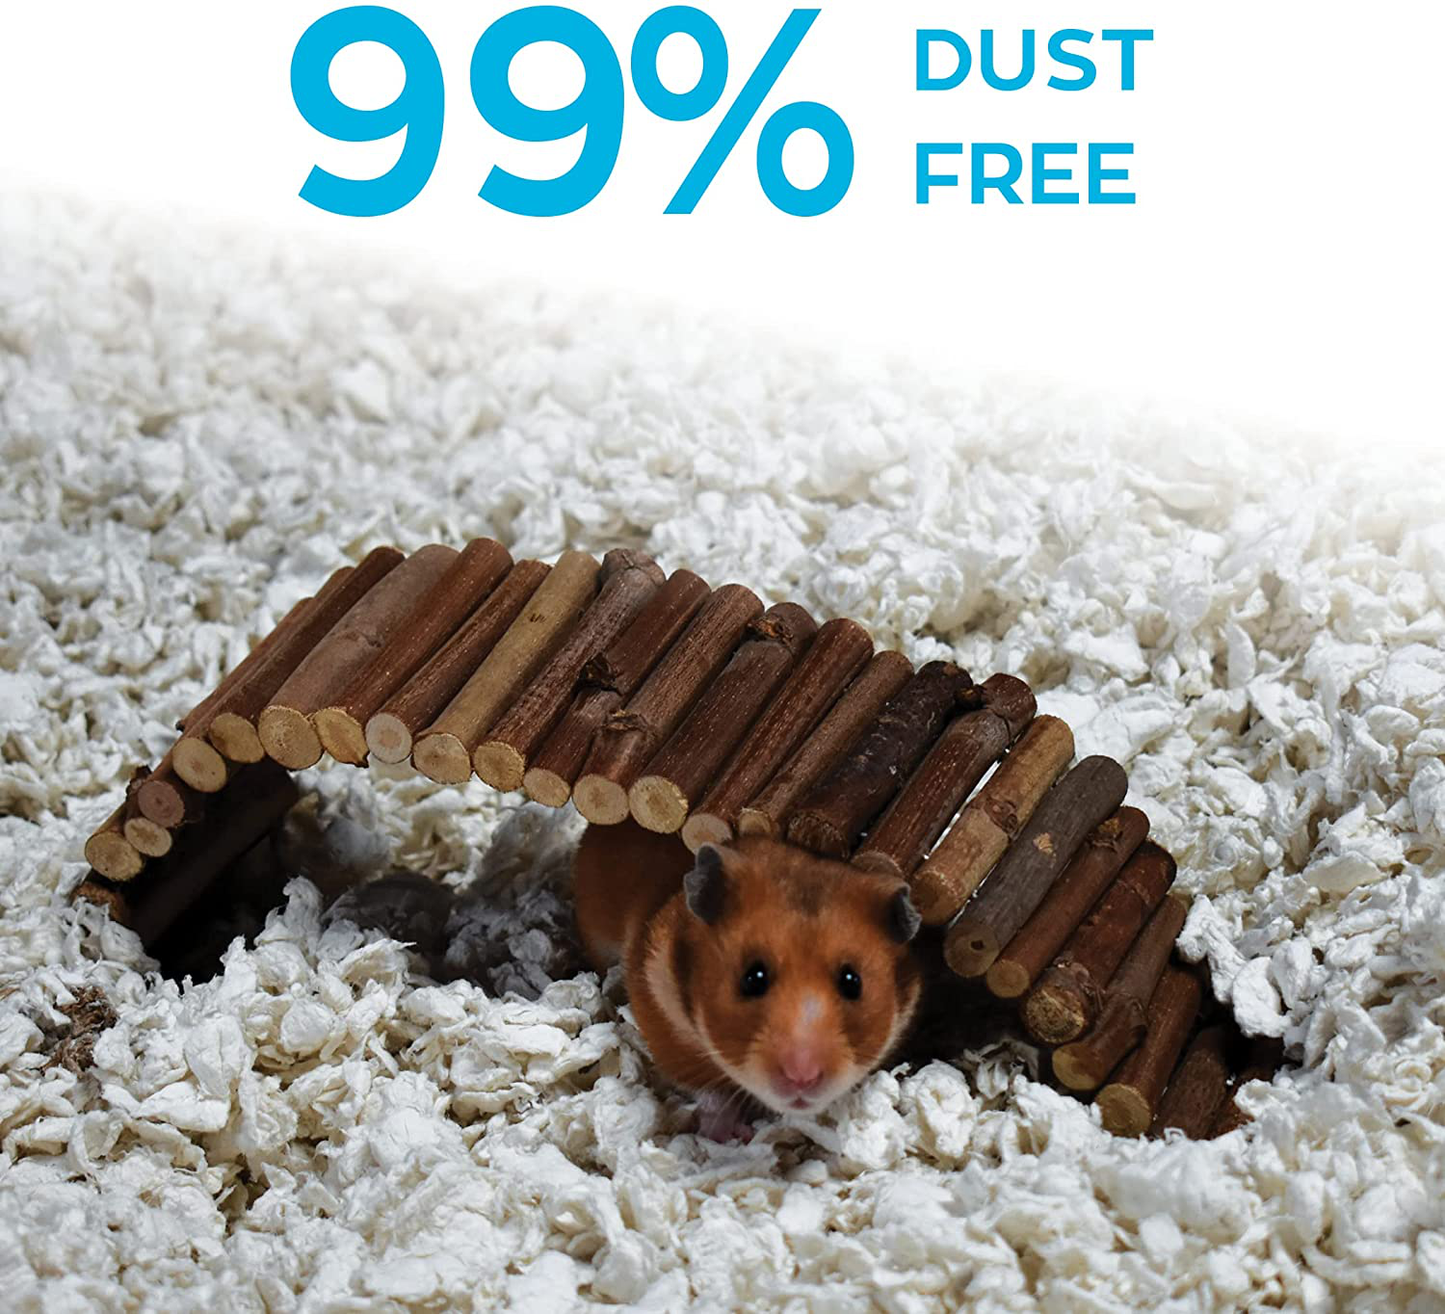 Carefresh 99% Dust-Free Natural Paper Small Pet Bedding with Odor Control